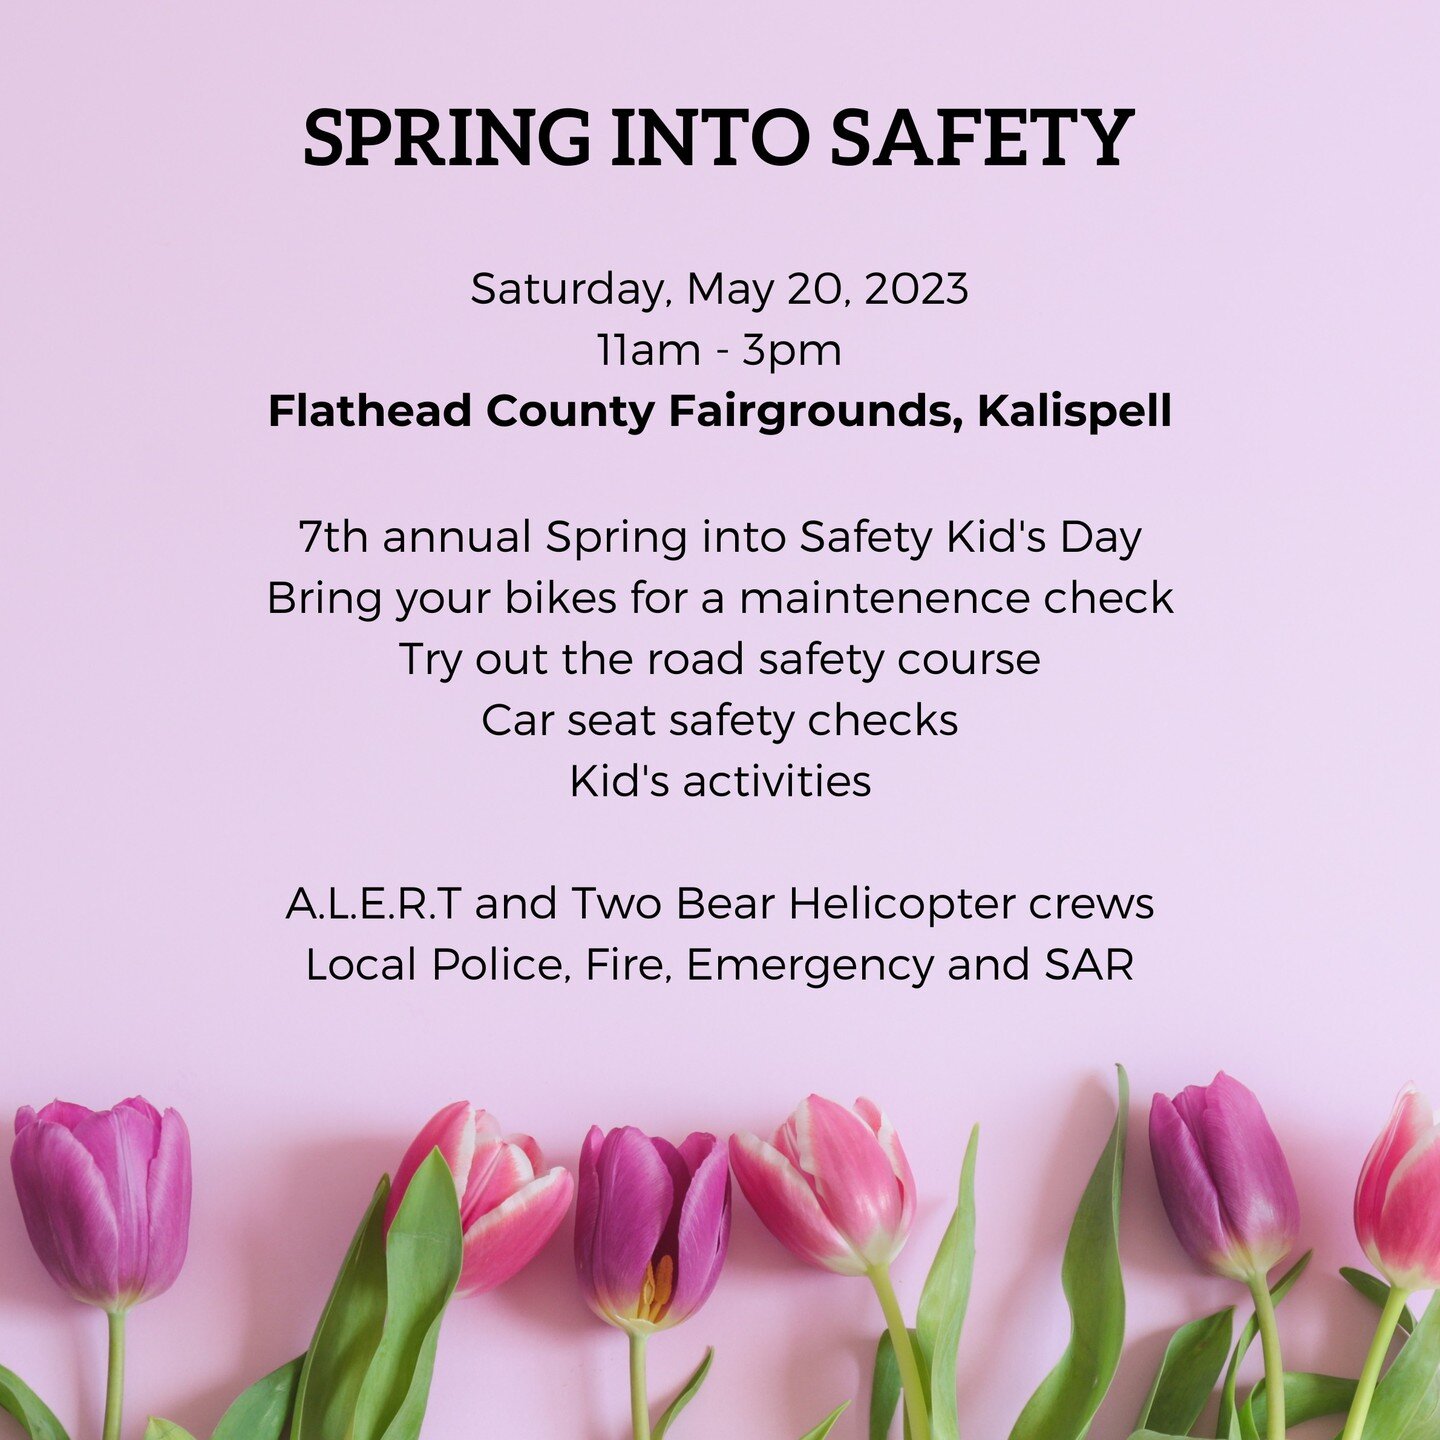 Spring into Safety coming up! Fun and free time for families!